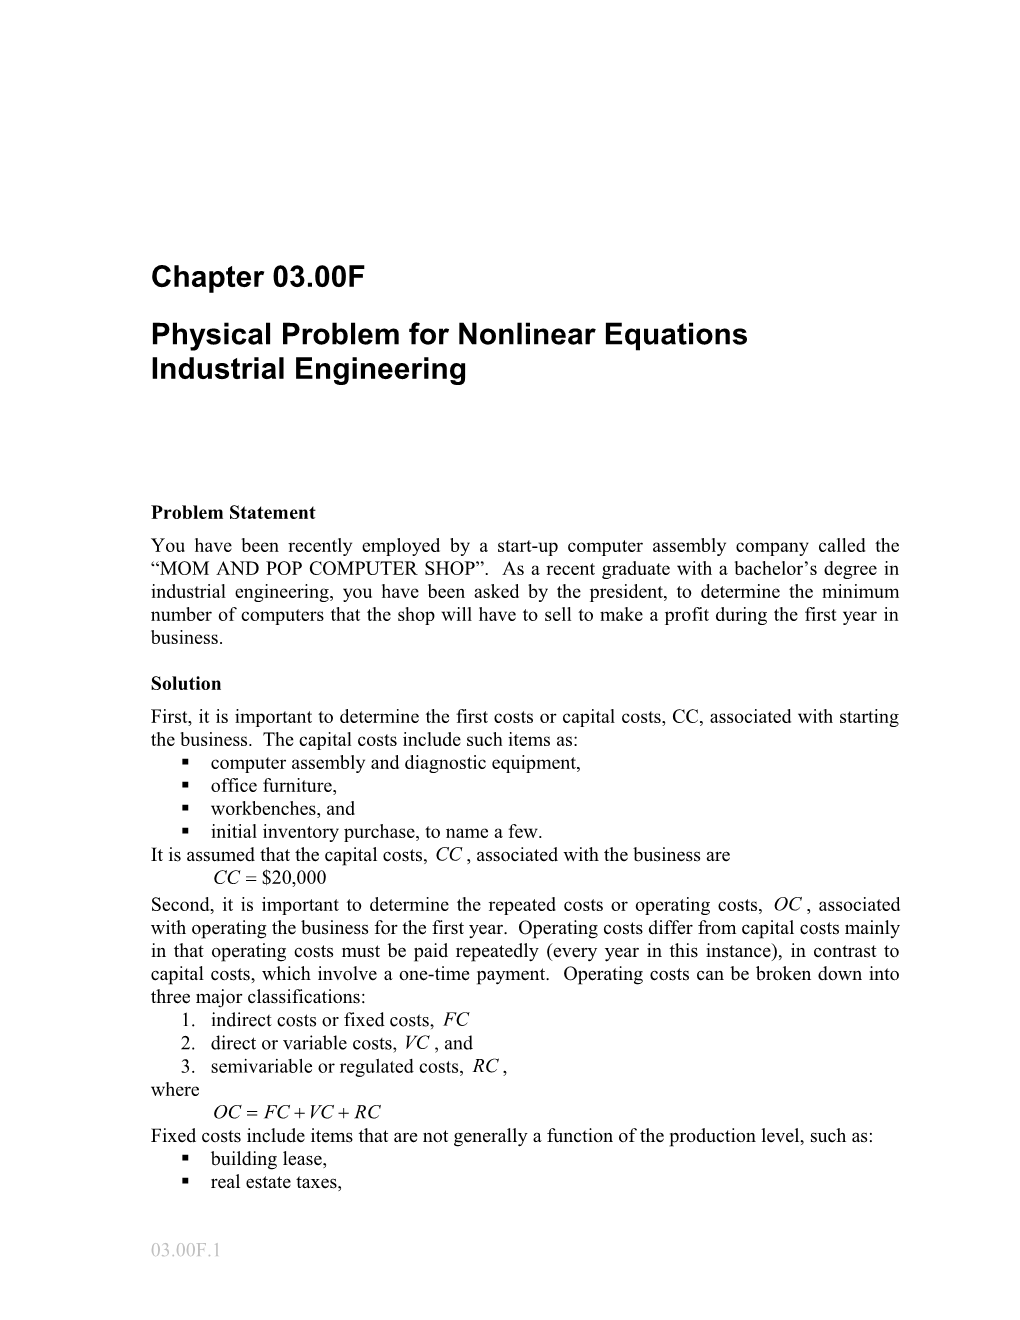 Physical Problem for Nonlinear Equations: Industrial Engineering